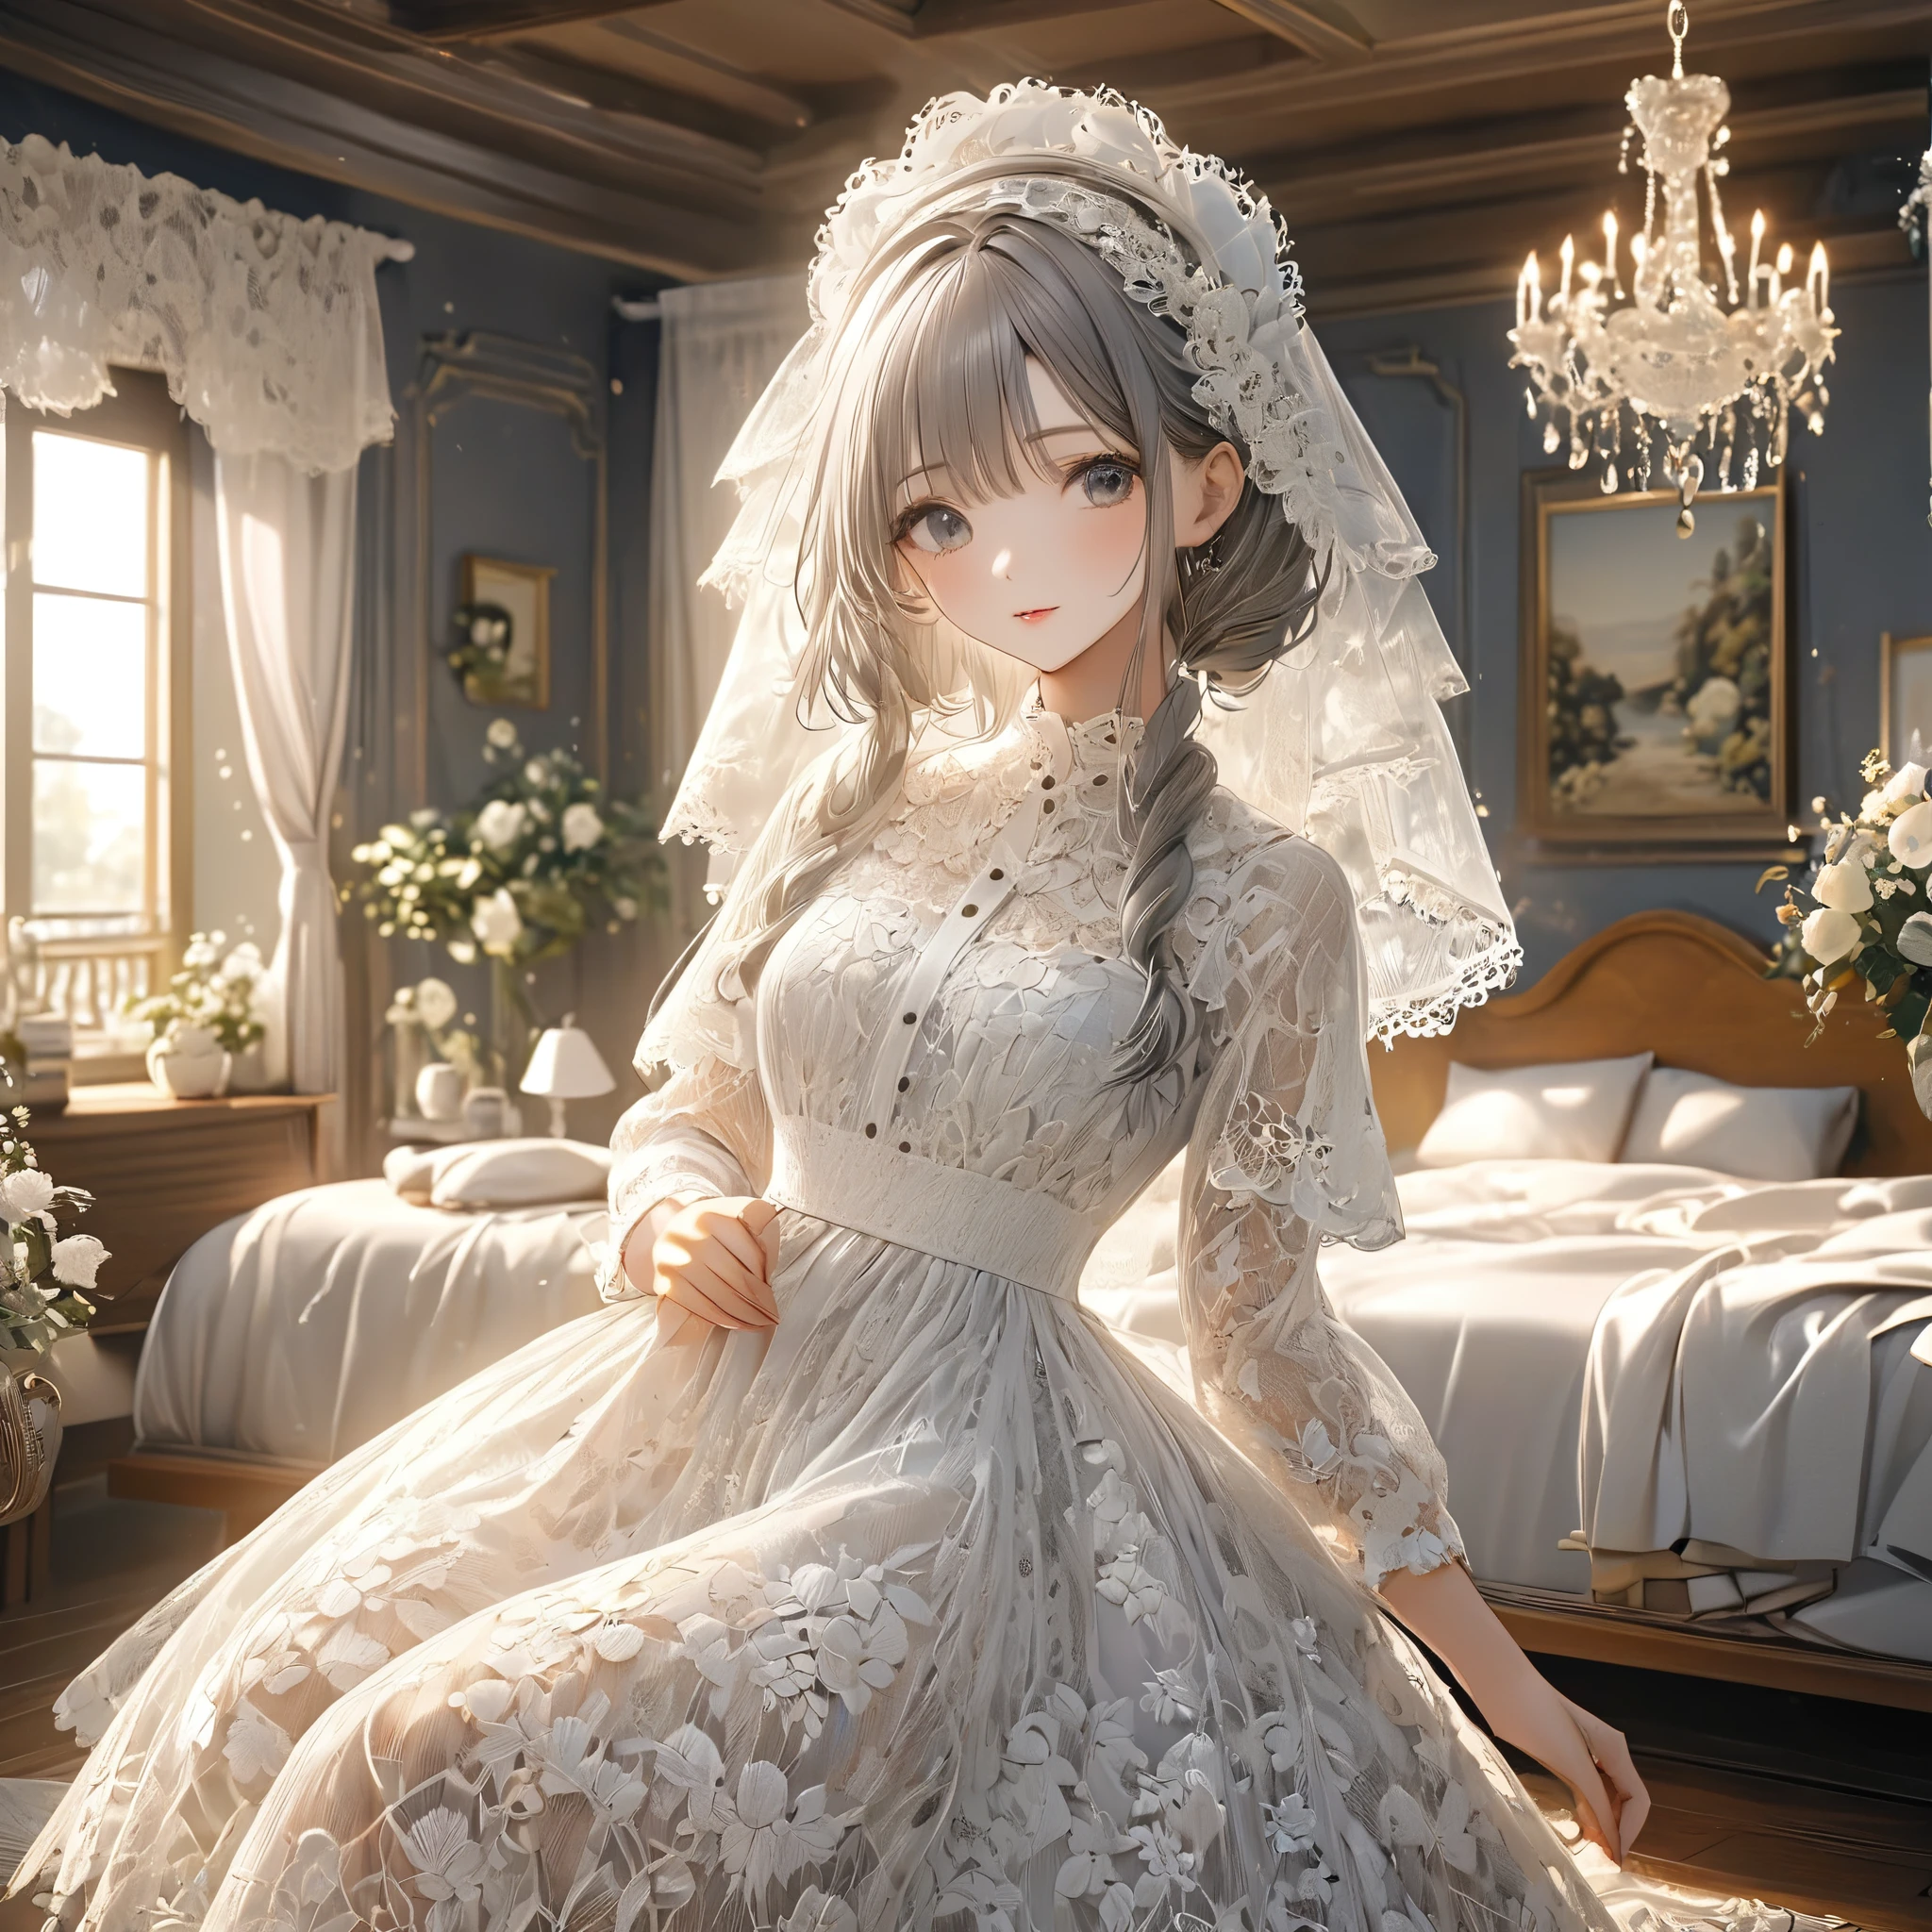 Clothing made of white lace, Beautiful lace dress, Lace clothes for room decoration, indoor, White lace, Very delicate lace, best quality:1.2, 4K, 8k, Very detailed, High Detail, masterpiece:1.2,